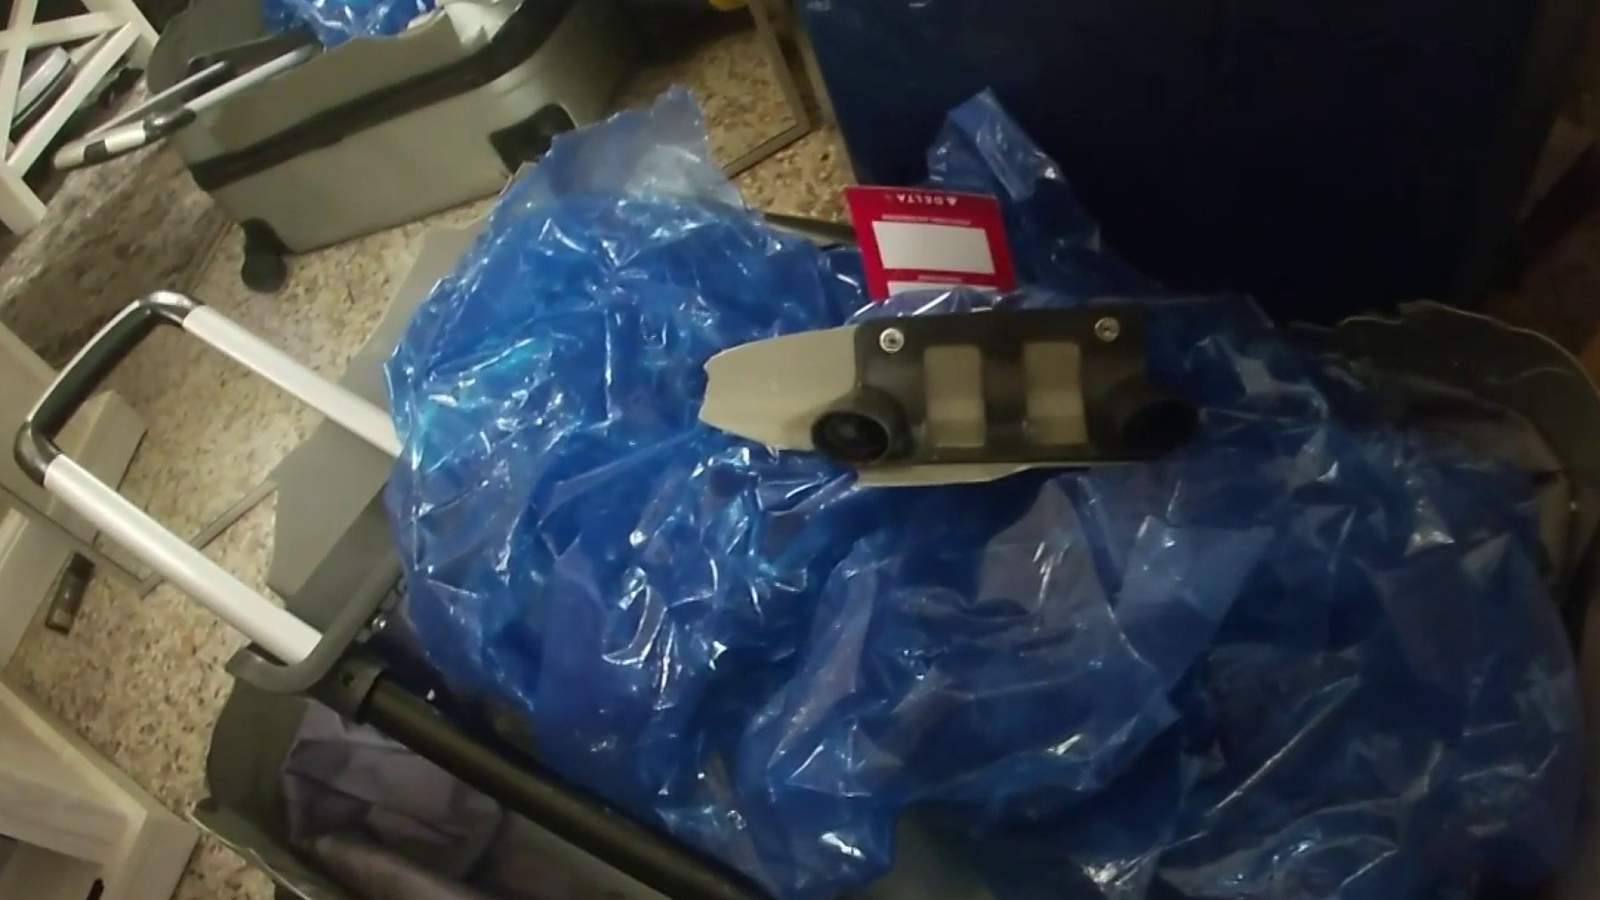 Expert offers tips after Delta destroyed woman's luggage